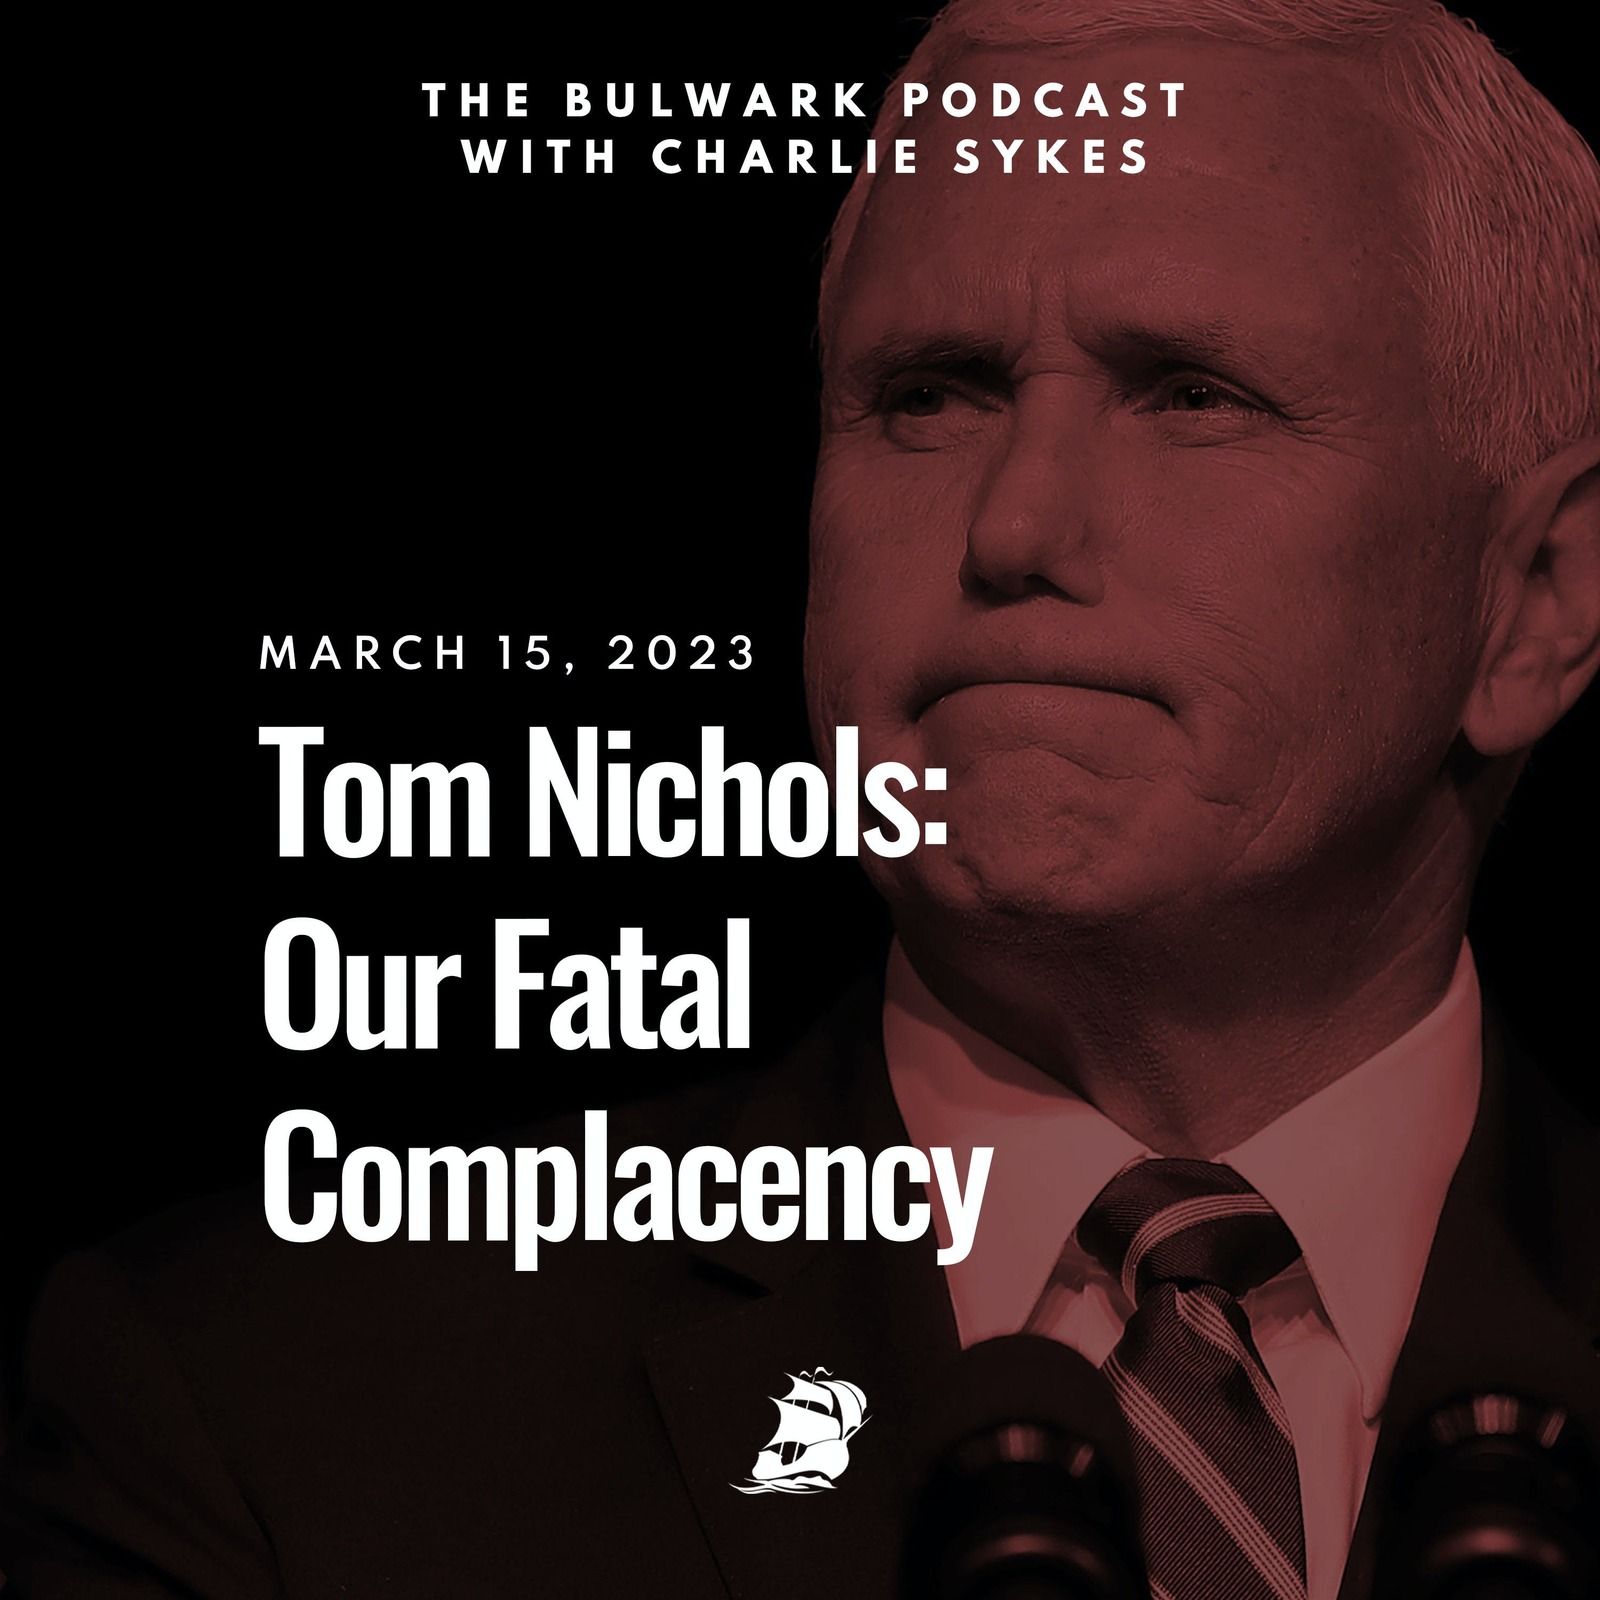 Tom Nichols: Our Fatal Complacency by The Bulwark Podcast